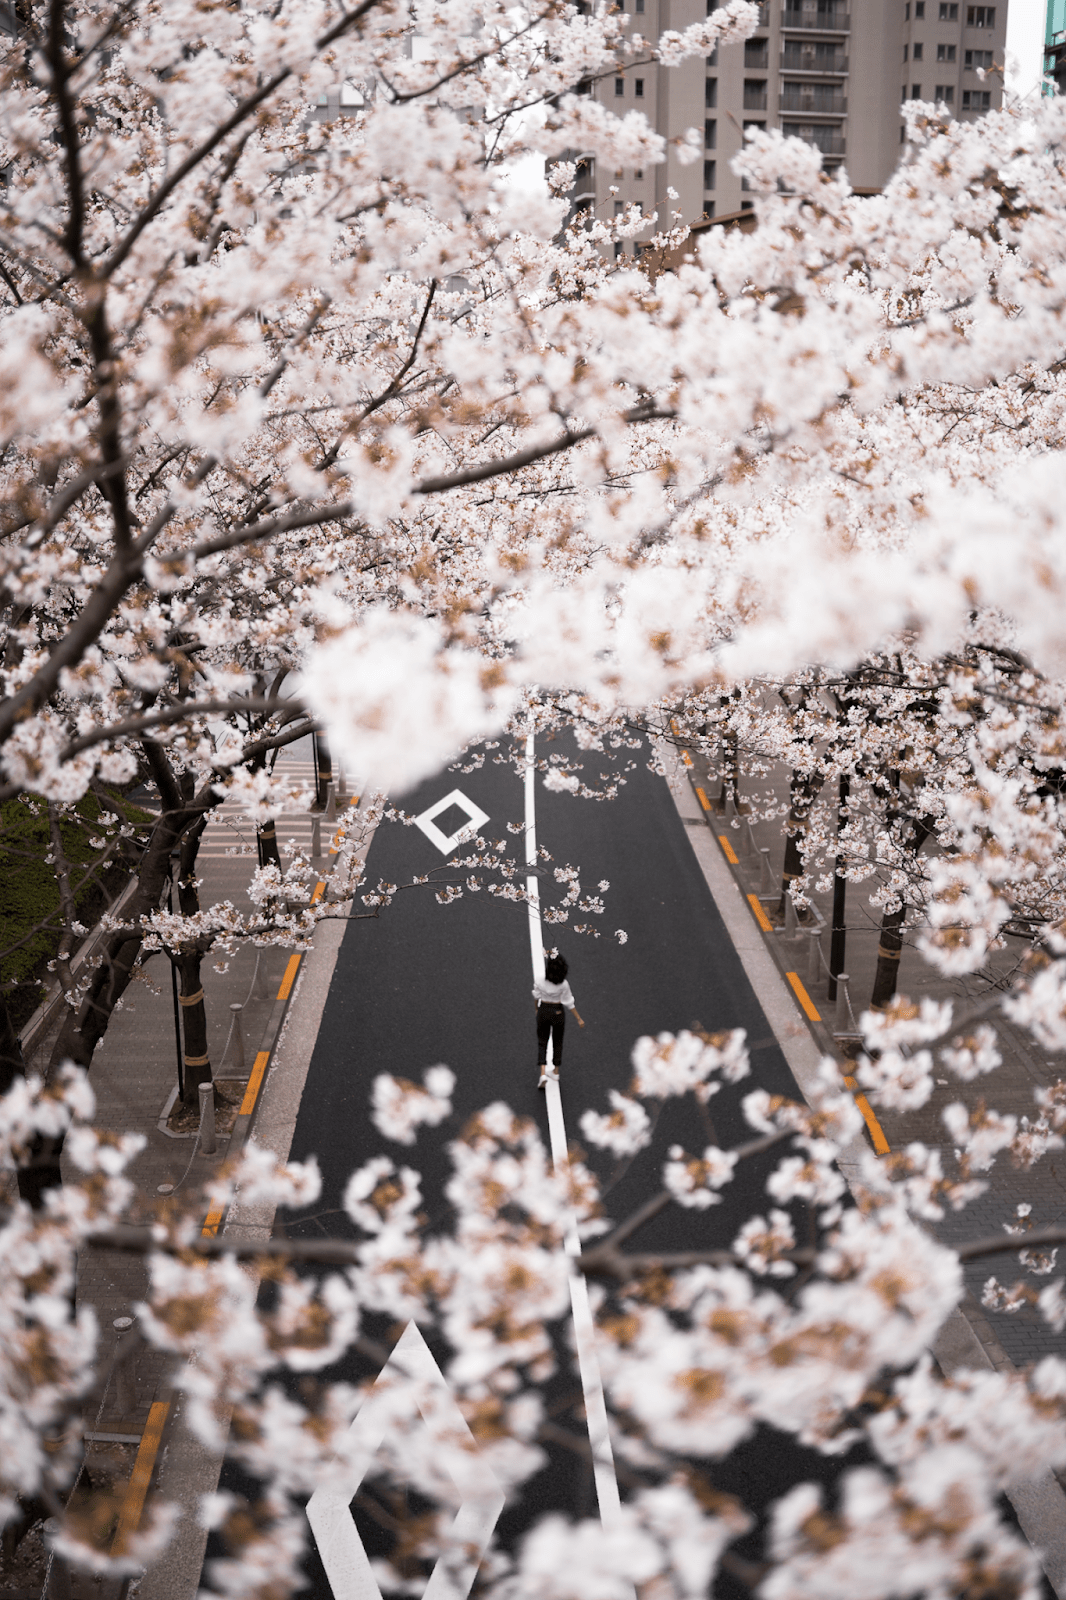 A person stands in the middle of a street surrounded by blooming cherry blossoms. - Cherry blossom